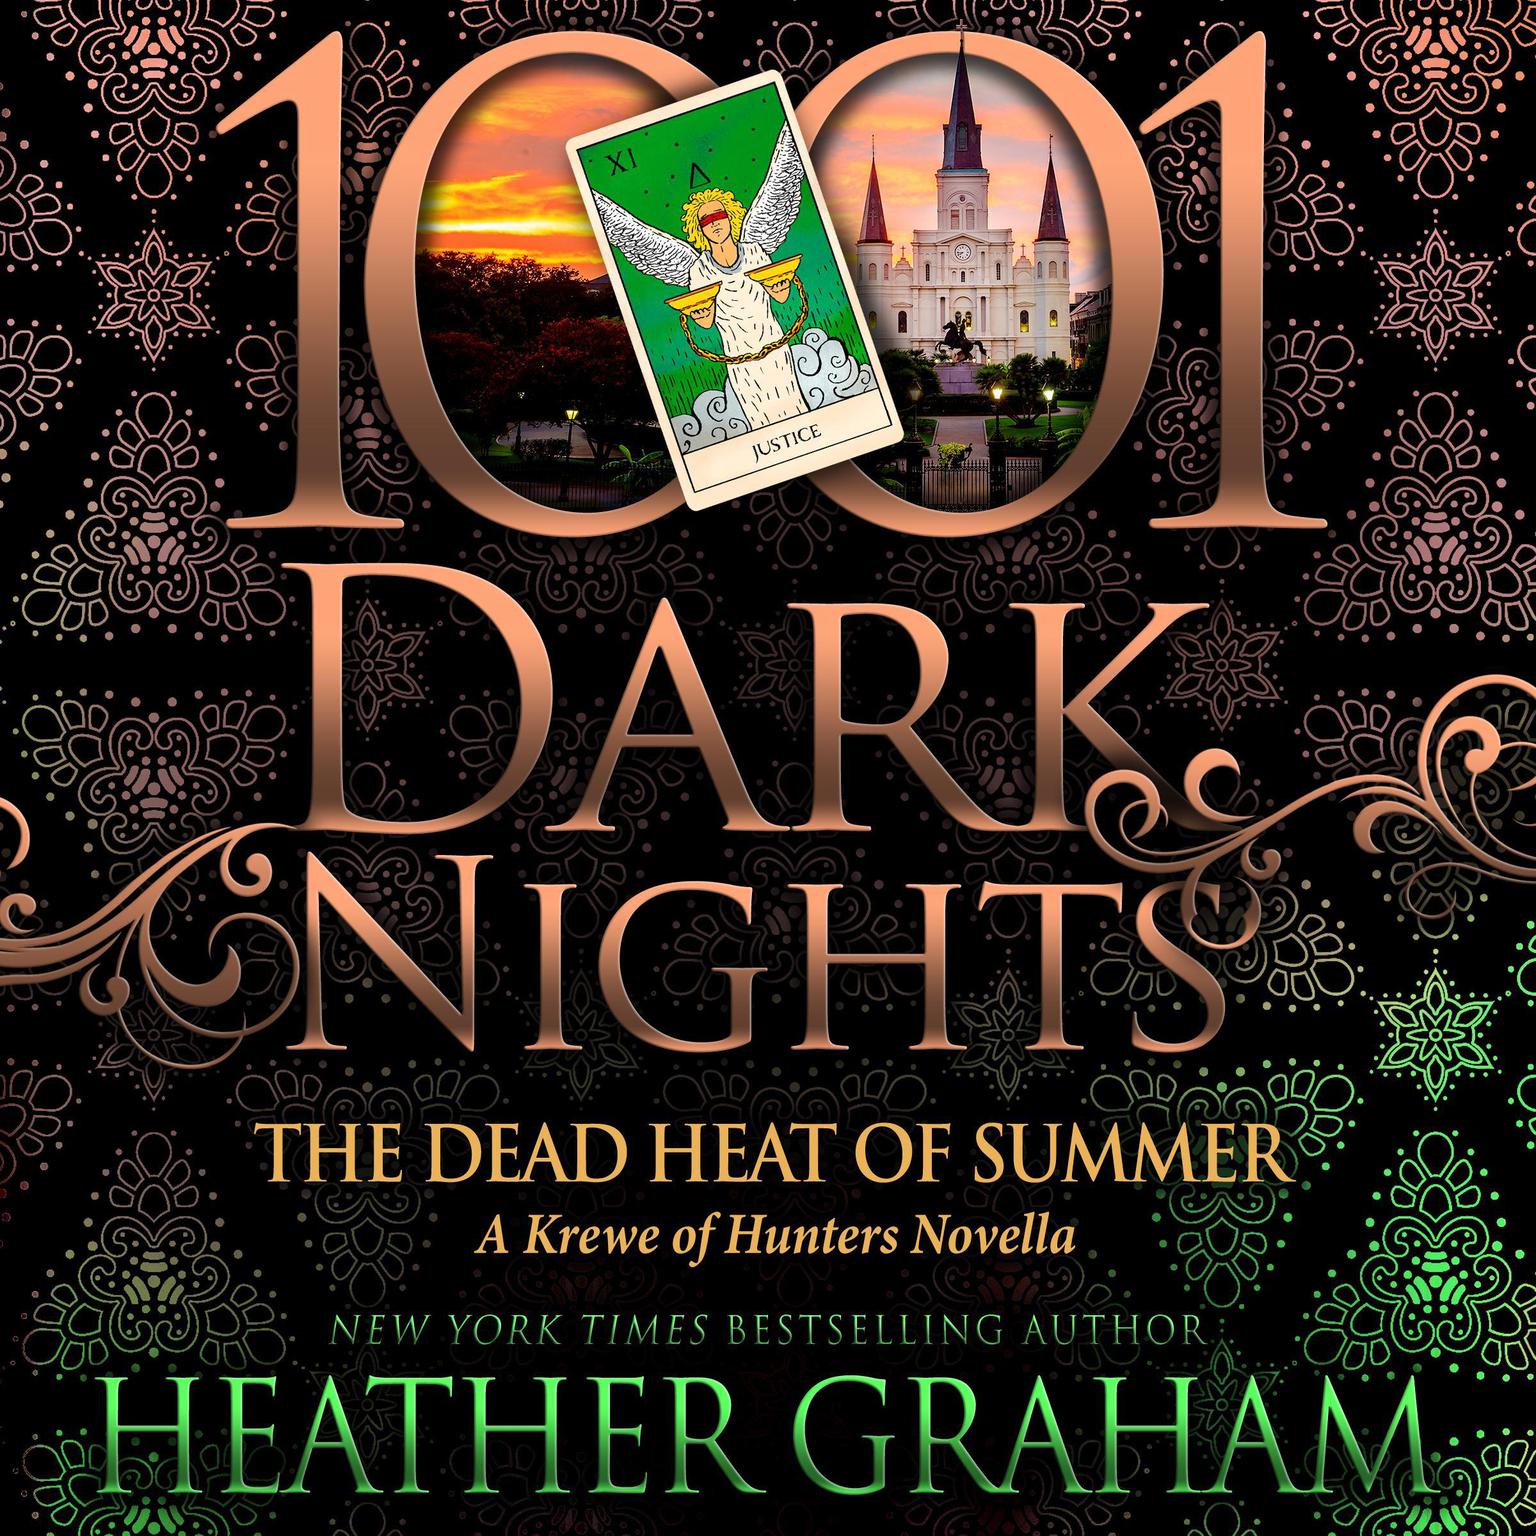 The Dead Heat of Summer: A Krewe of Hunters Novella Audiobook, by Heather Graham